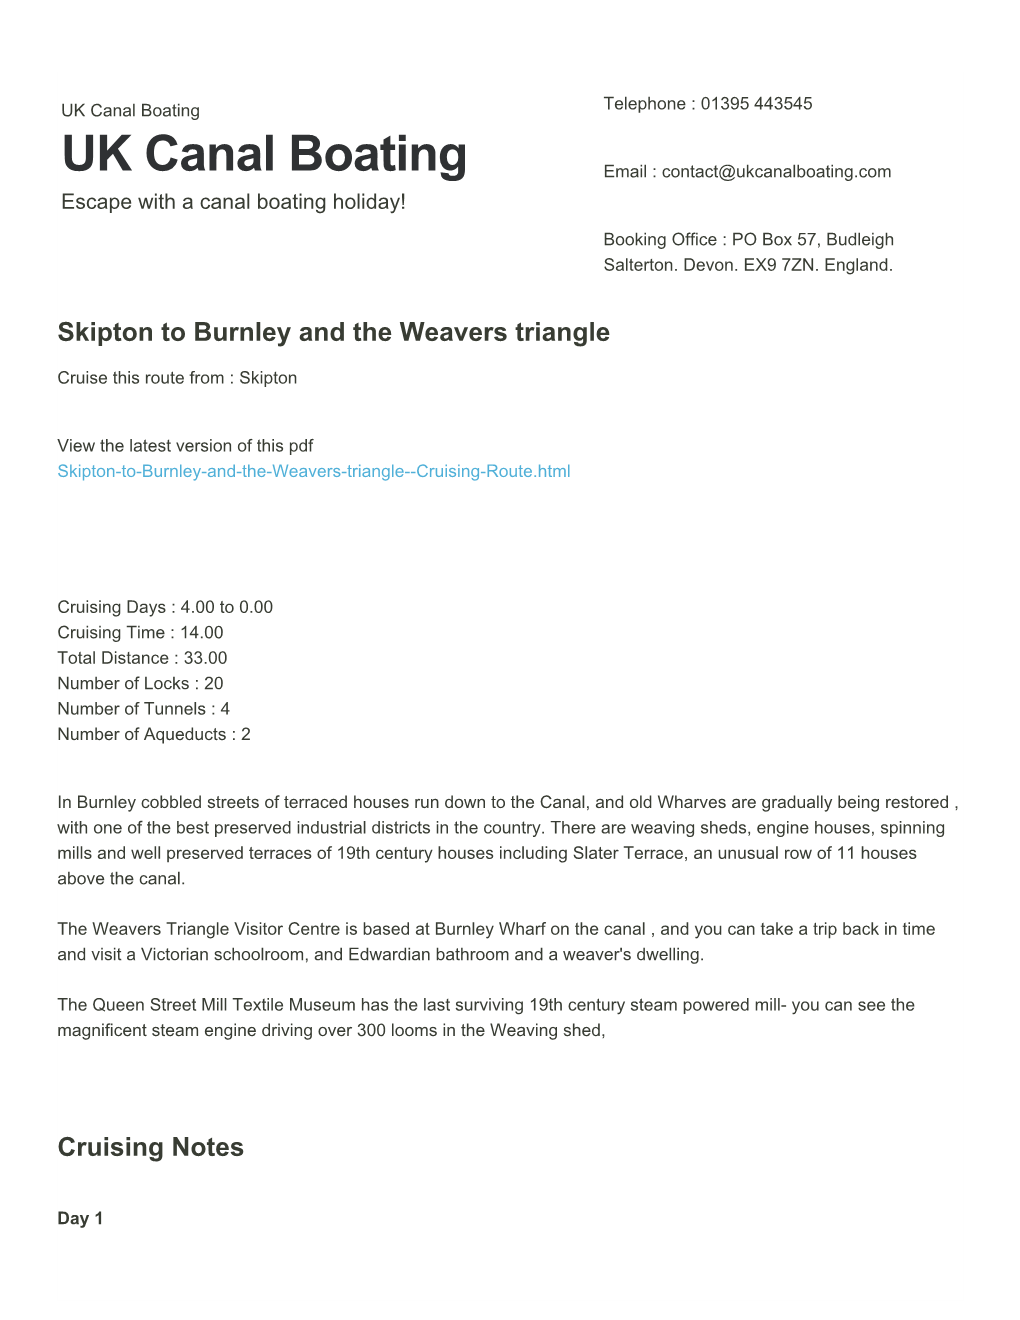 Skipton to Burnley and the Weavers Triangle | UK Canal Boating